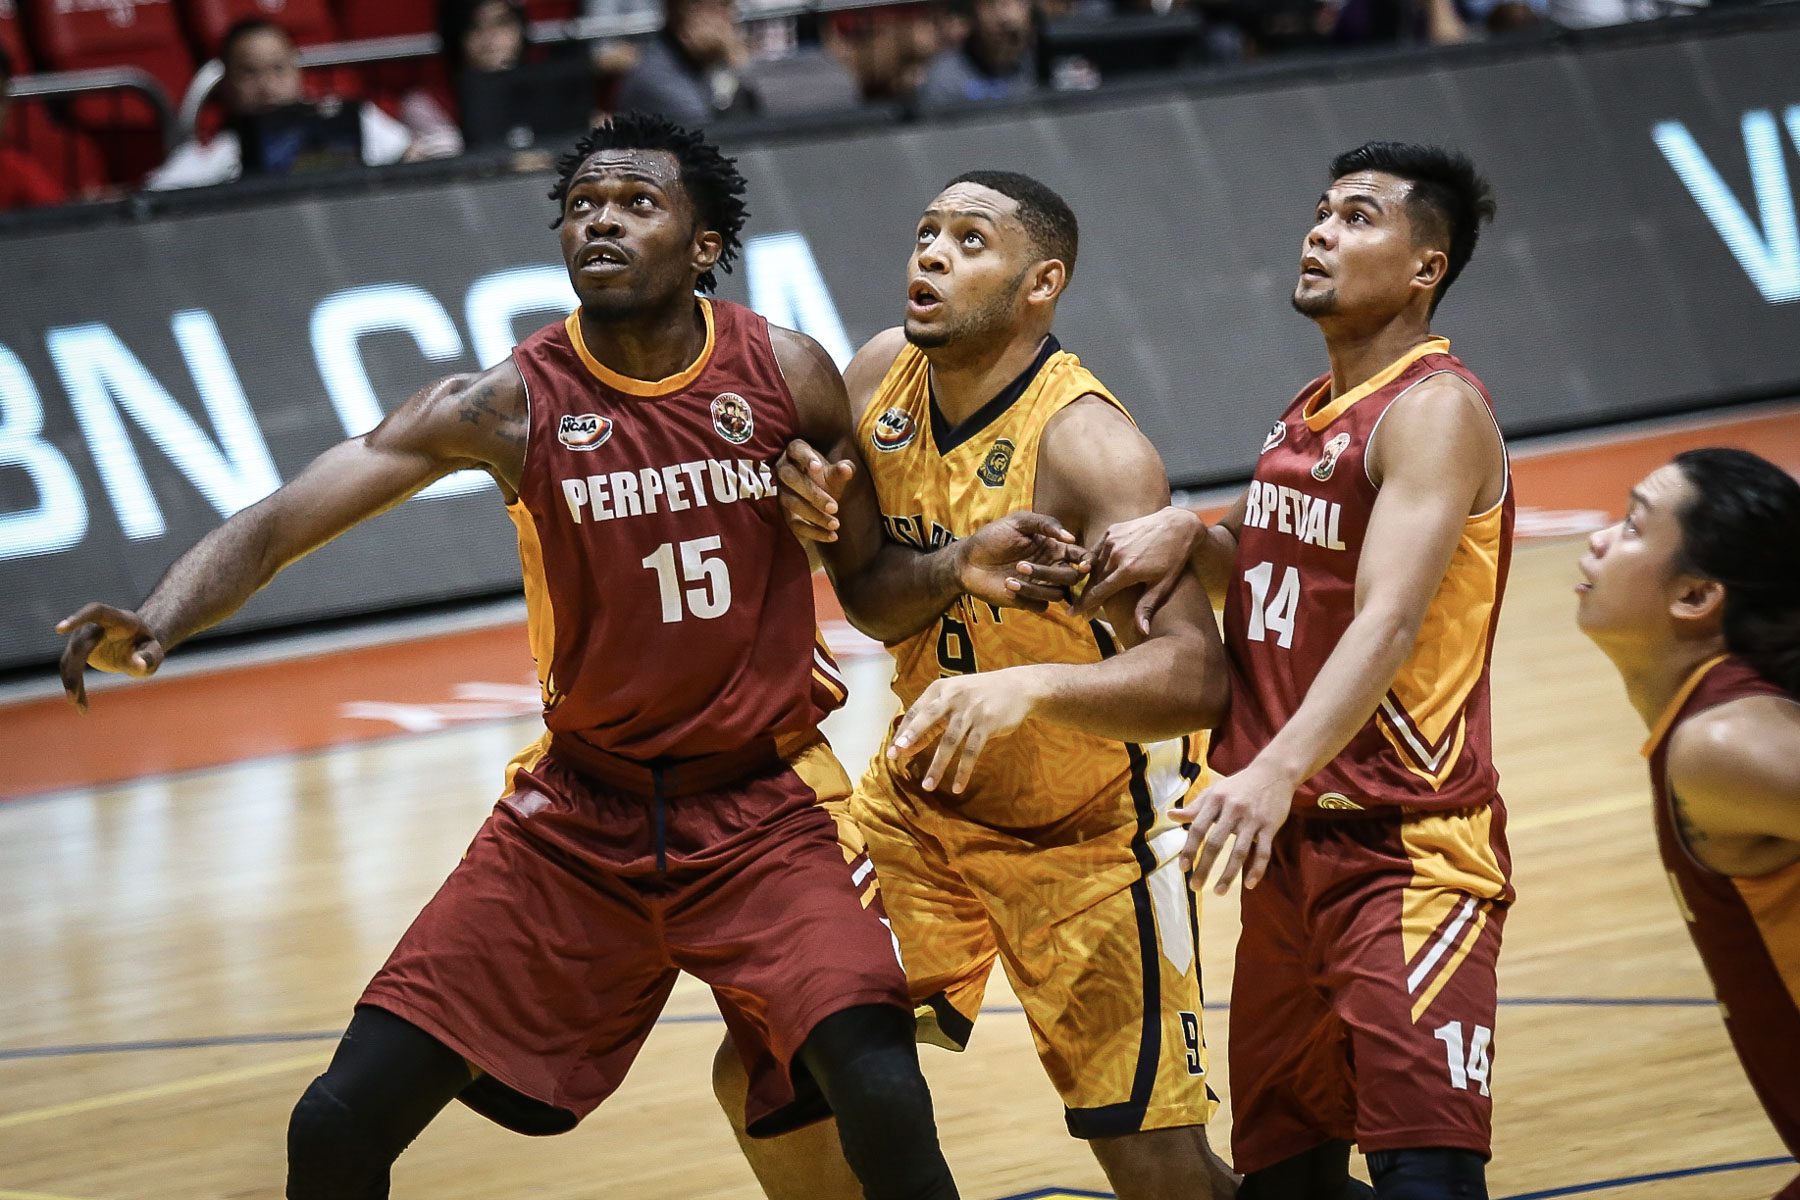 JRU crushes EAC by 29 points, Eze powers Altas against AU